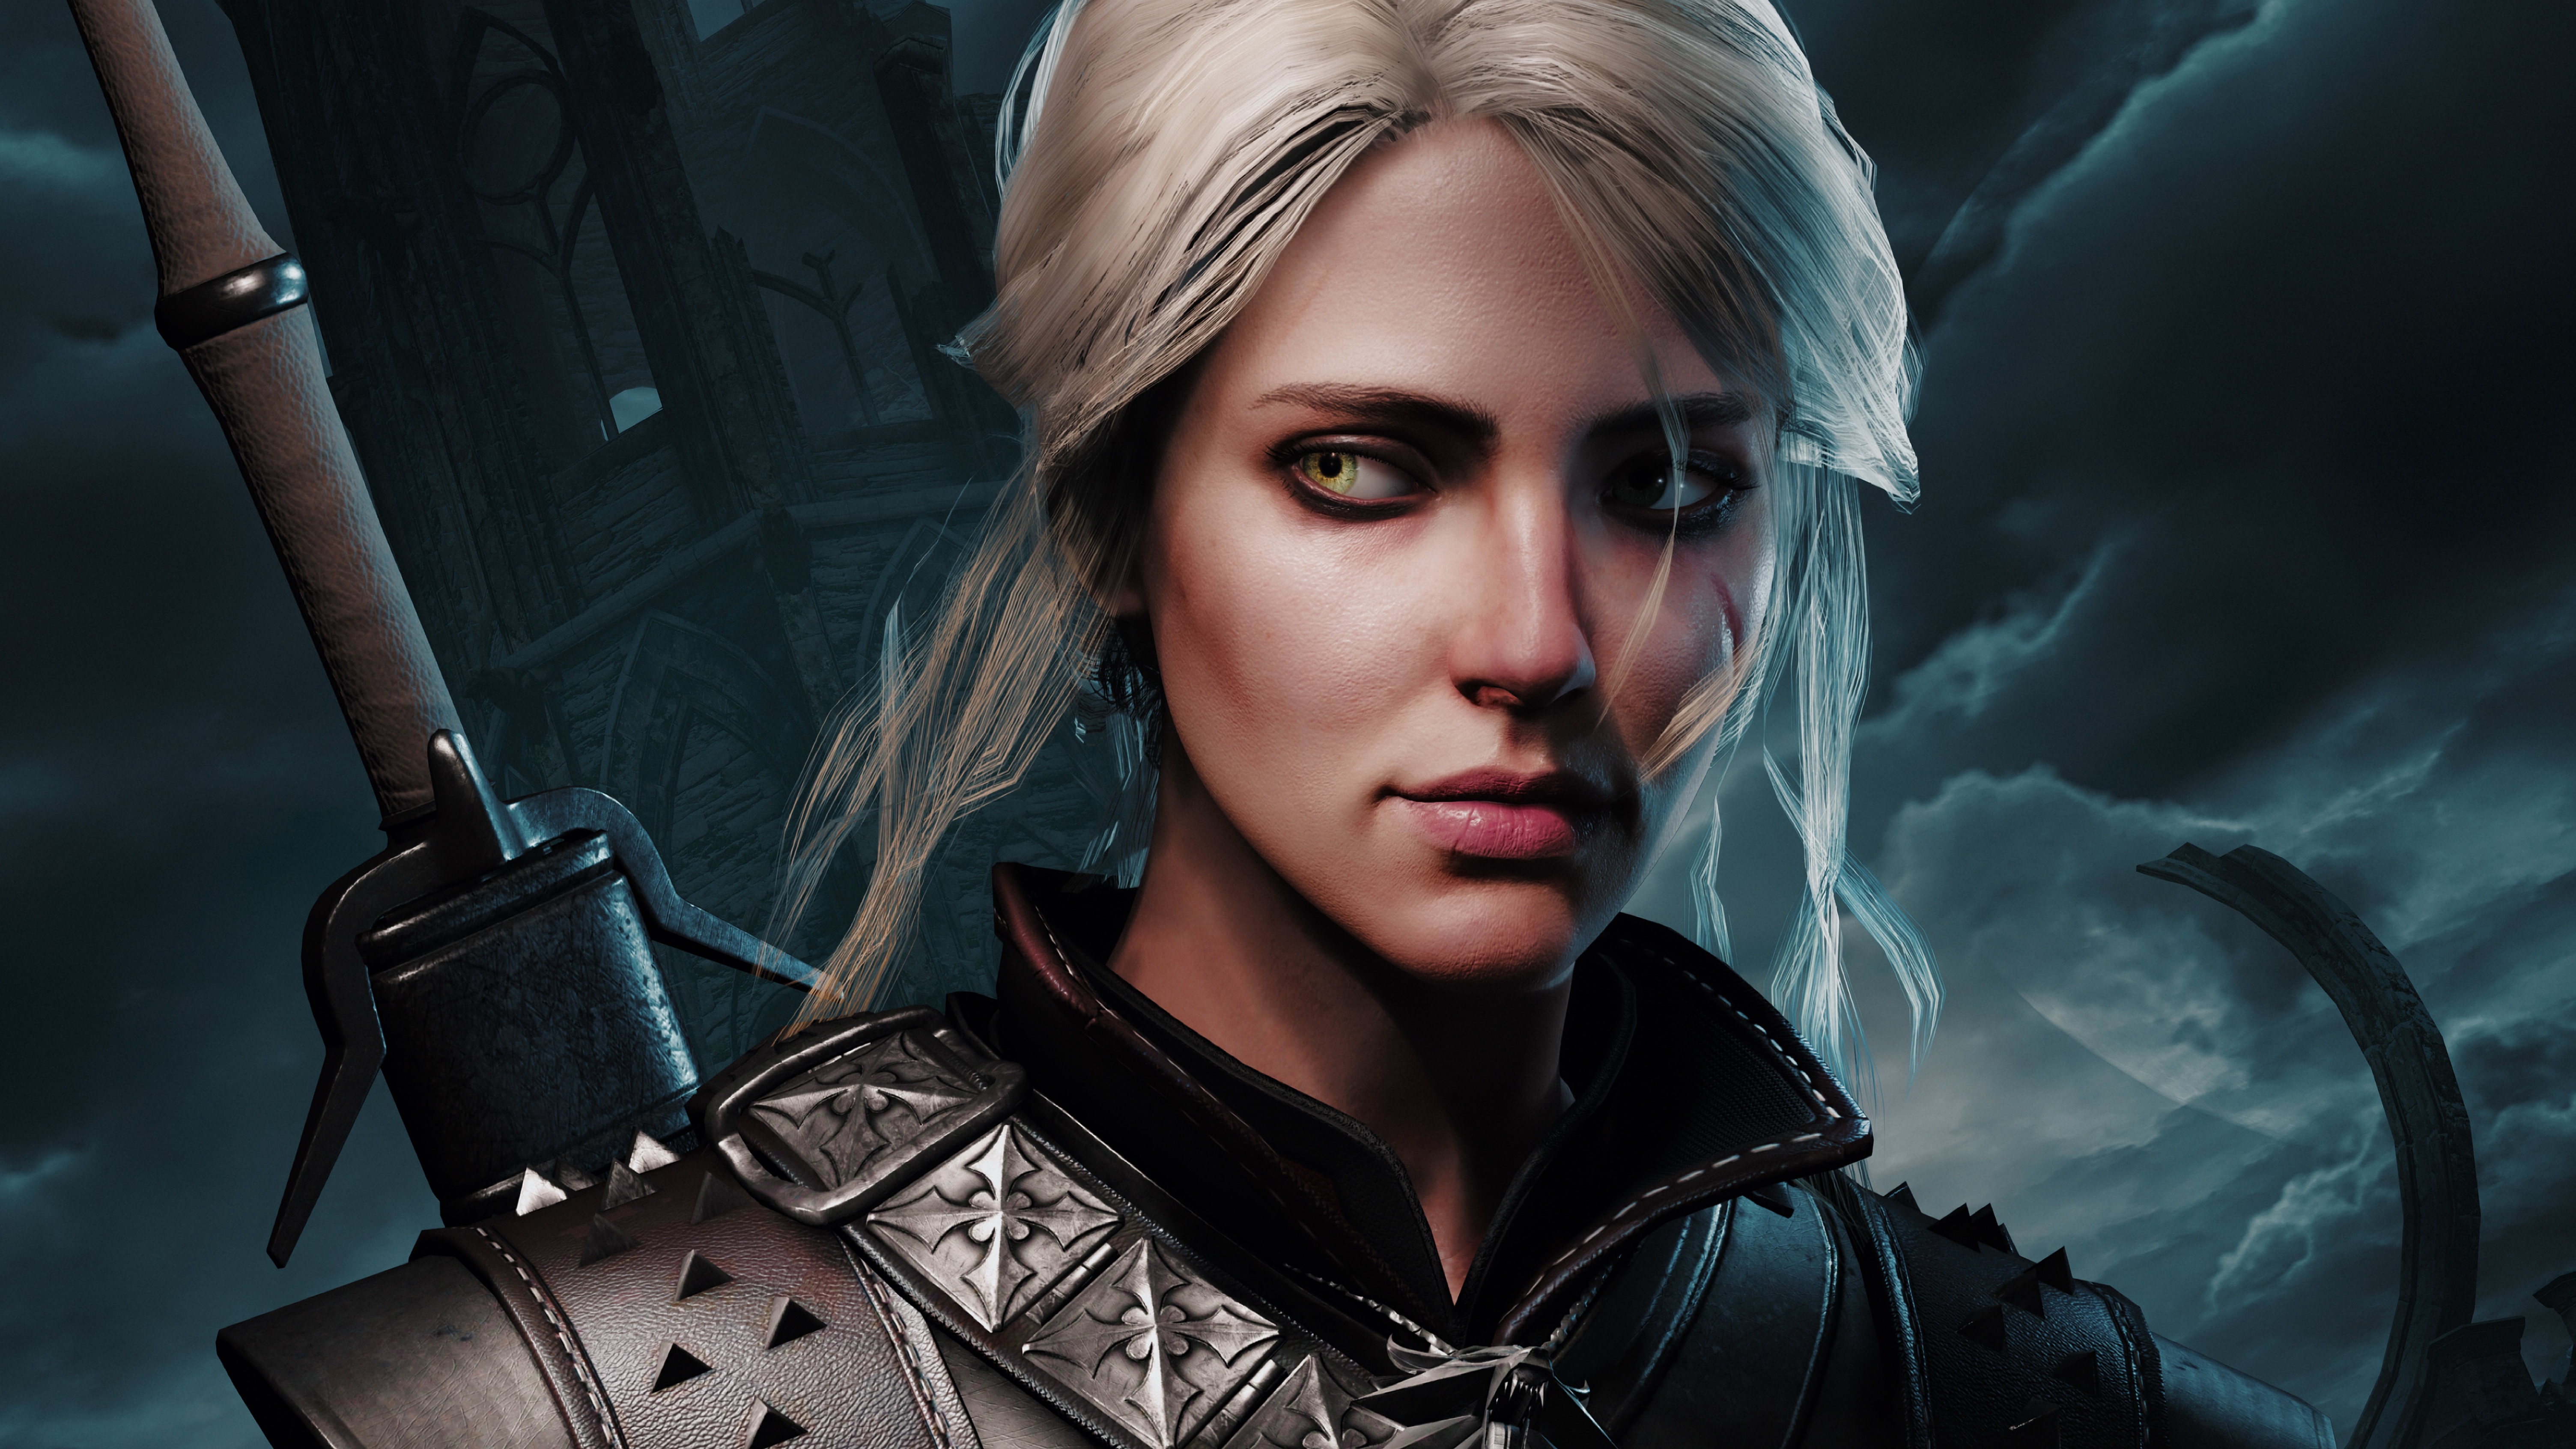 Wallpaper Ciri The Witcher 3 Wild Hunt The Witcher Beauty Blond  Background  Download Free Image